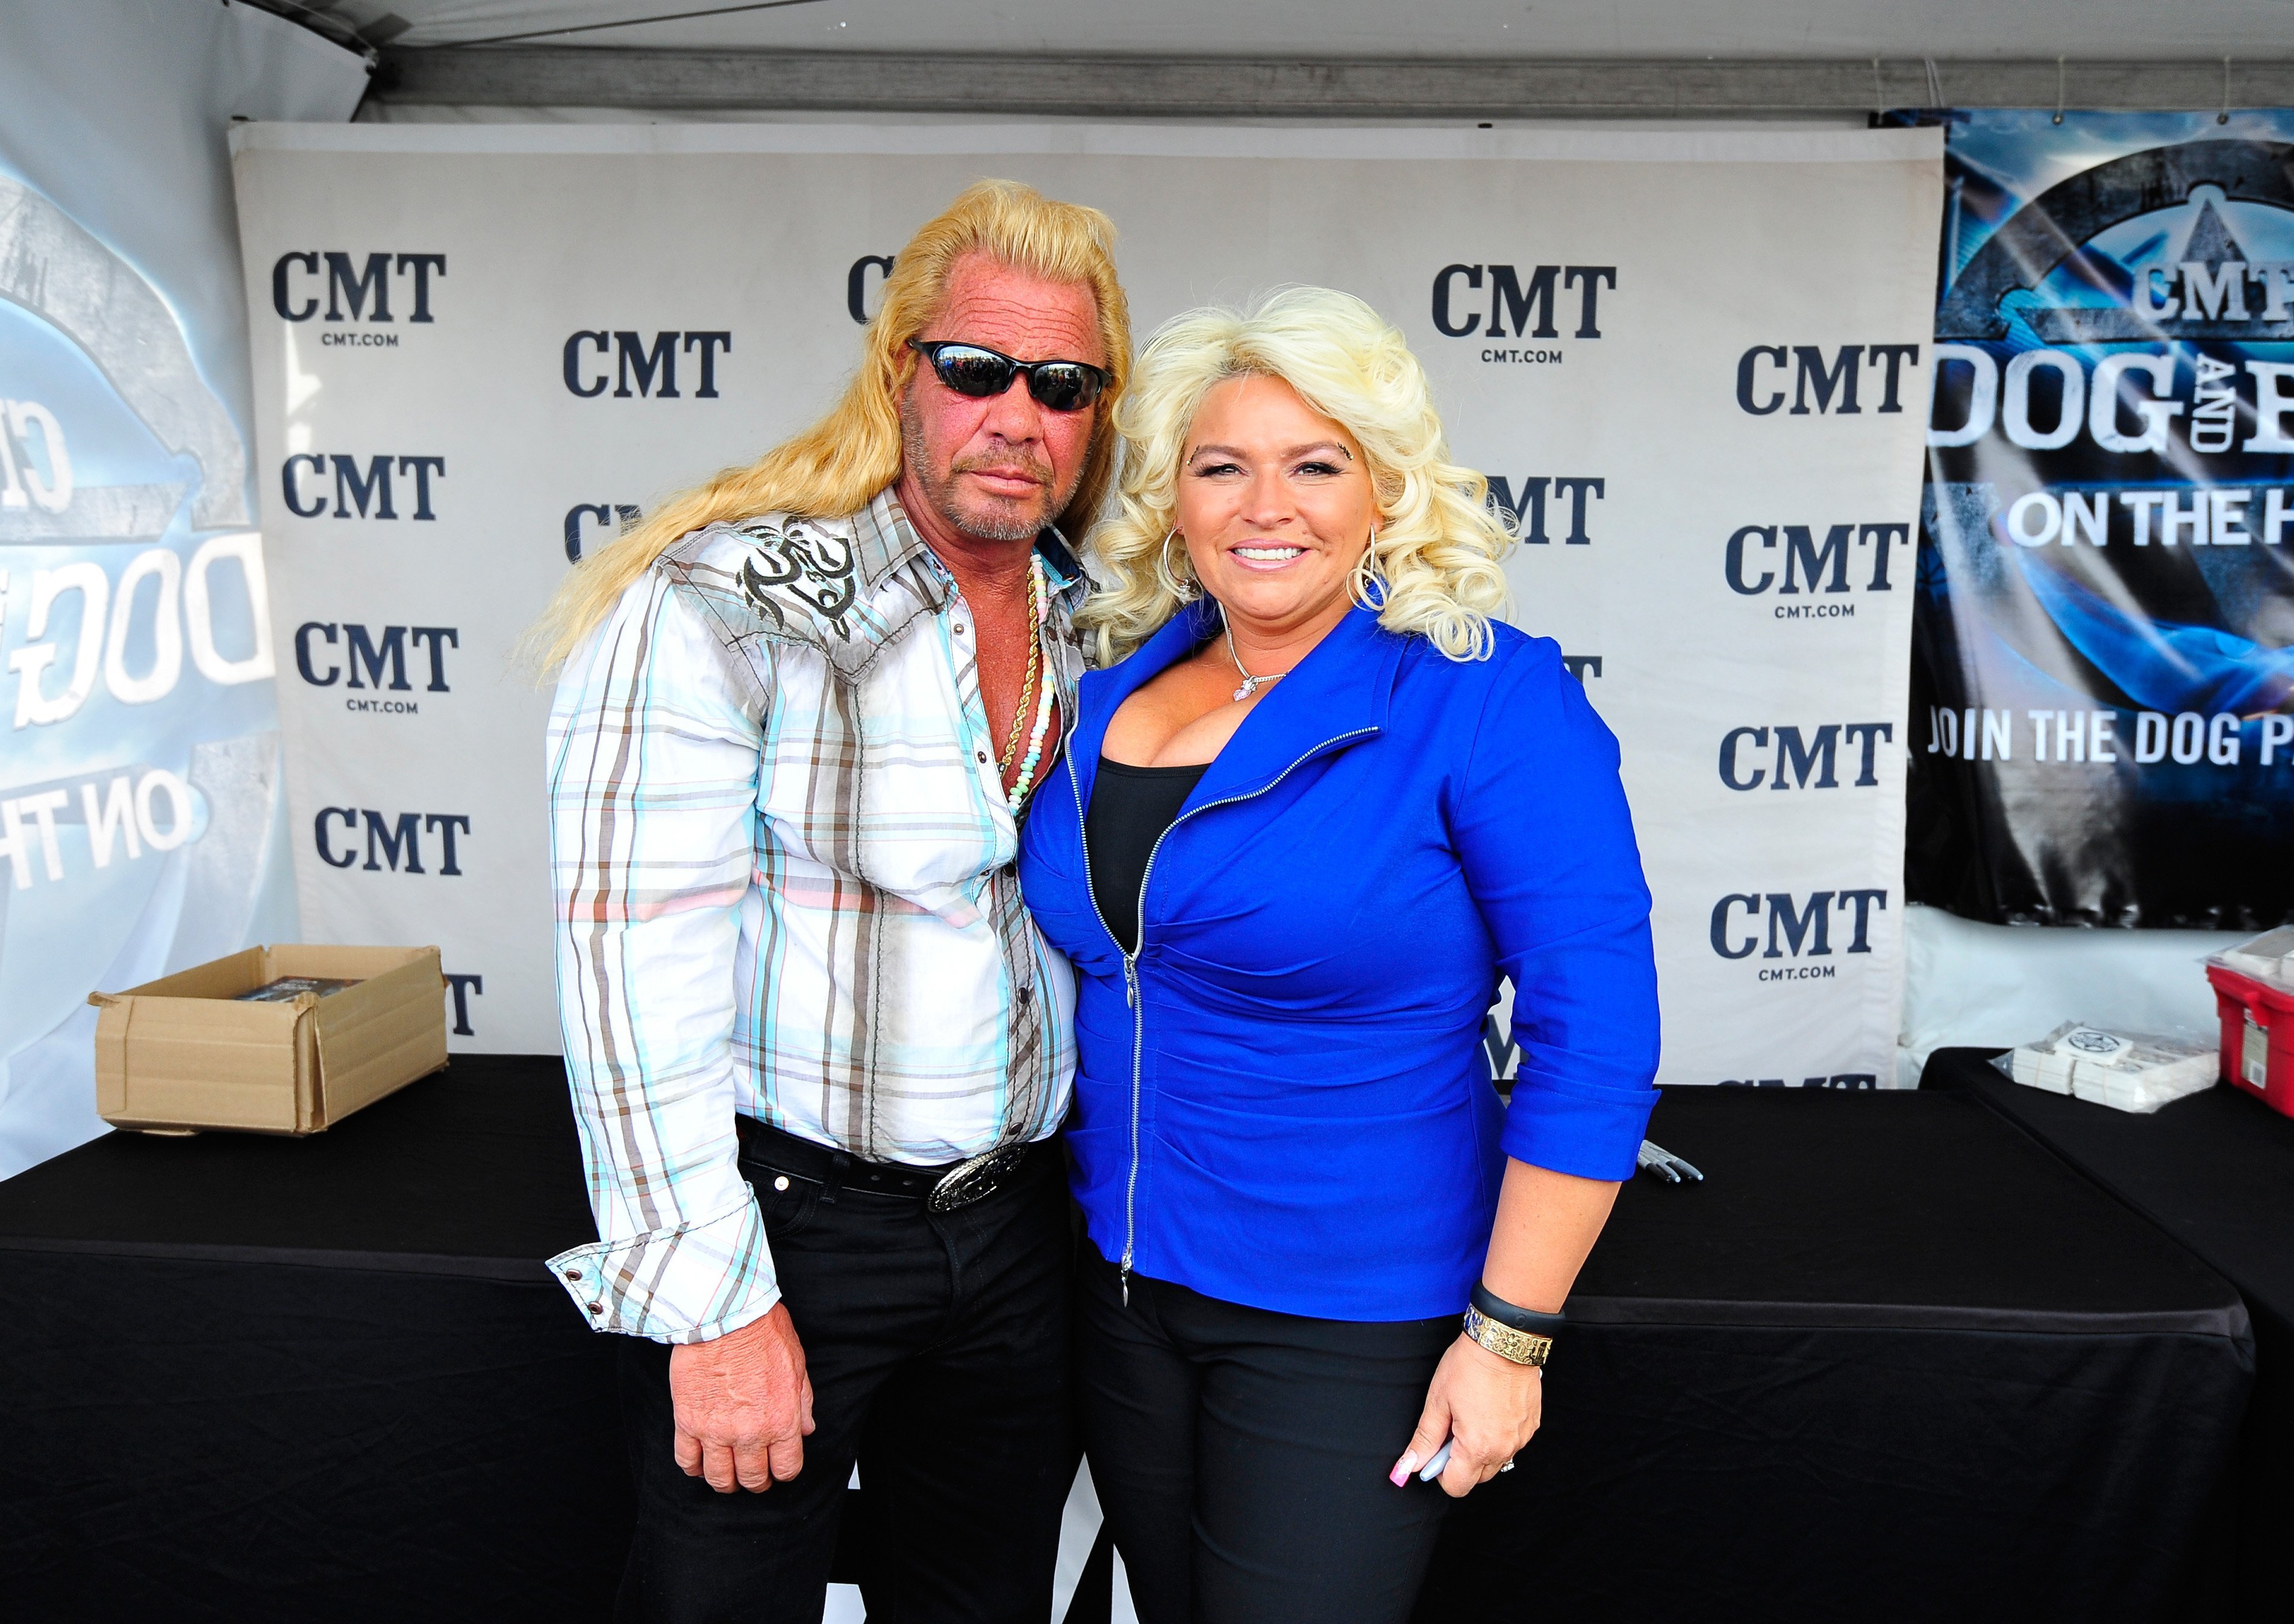 Duane and Beth Chapman at the ACM Experience during the 48th Annual Academy of Country Music Awards at the Orleans Arena on April 5, 2013 in Las Vegas, Nevada | Photo: Getty Images